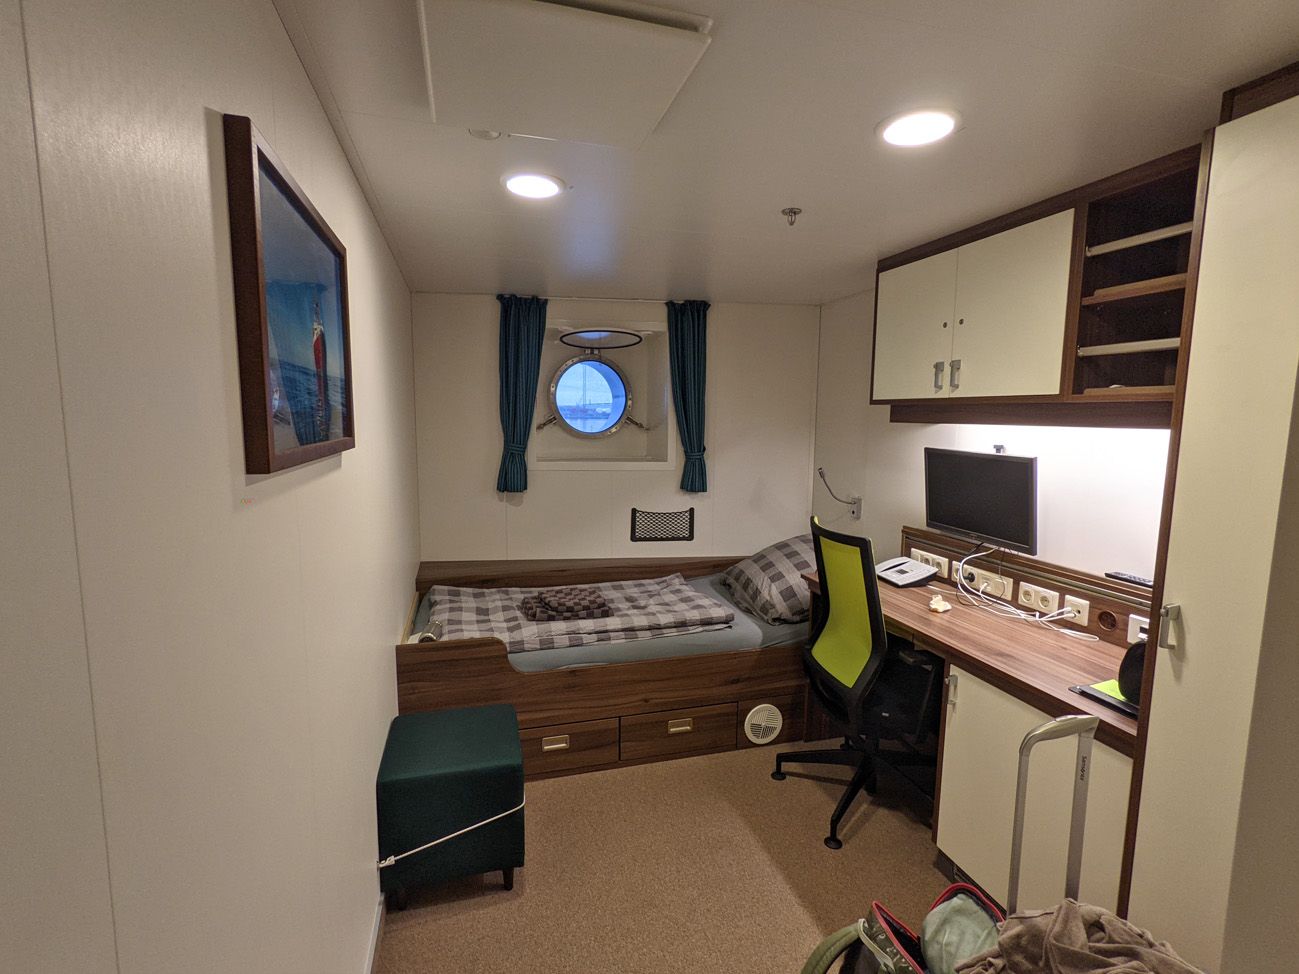 Each cabin has a bath, a bed and a desk.